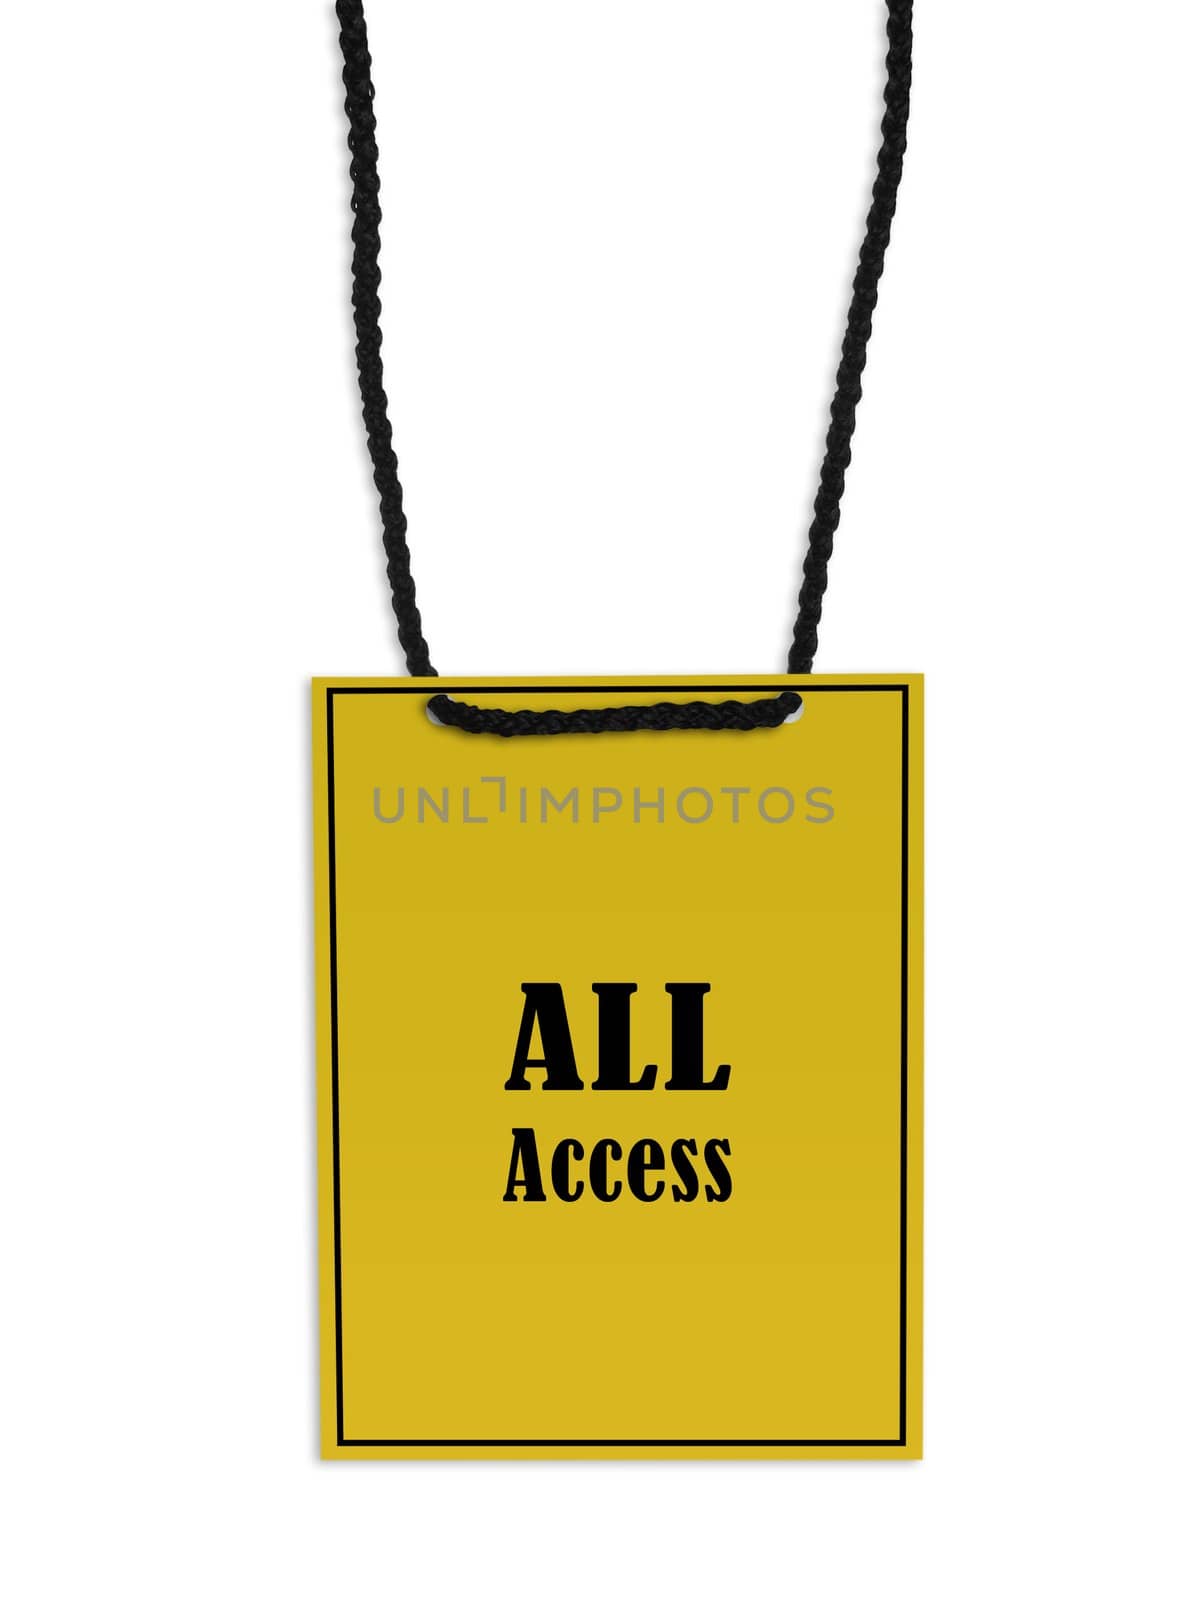 All access back stage pass on white background.